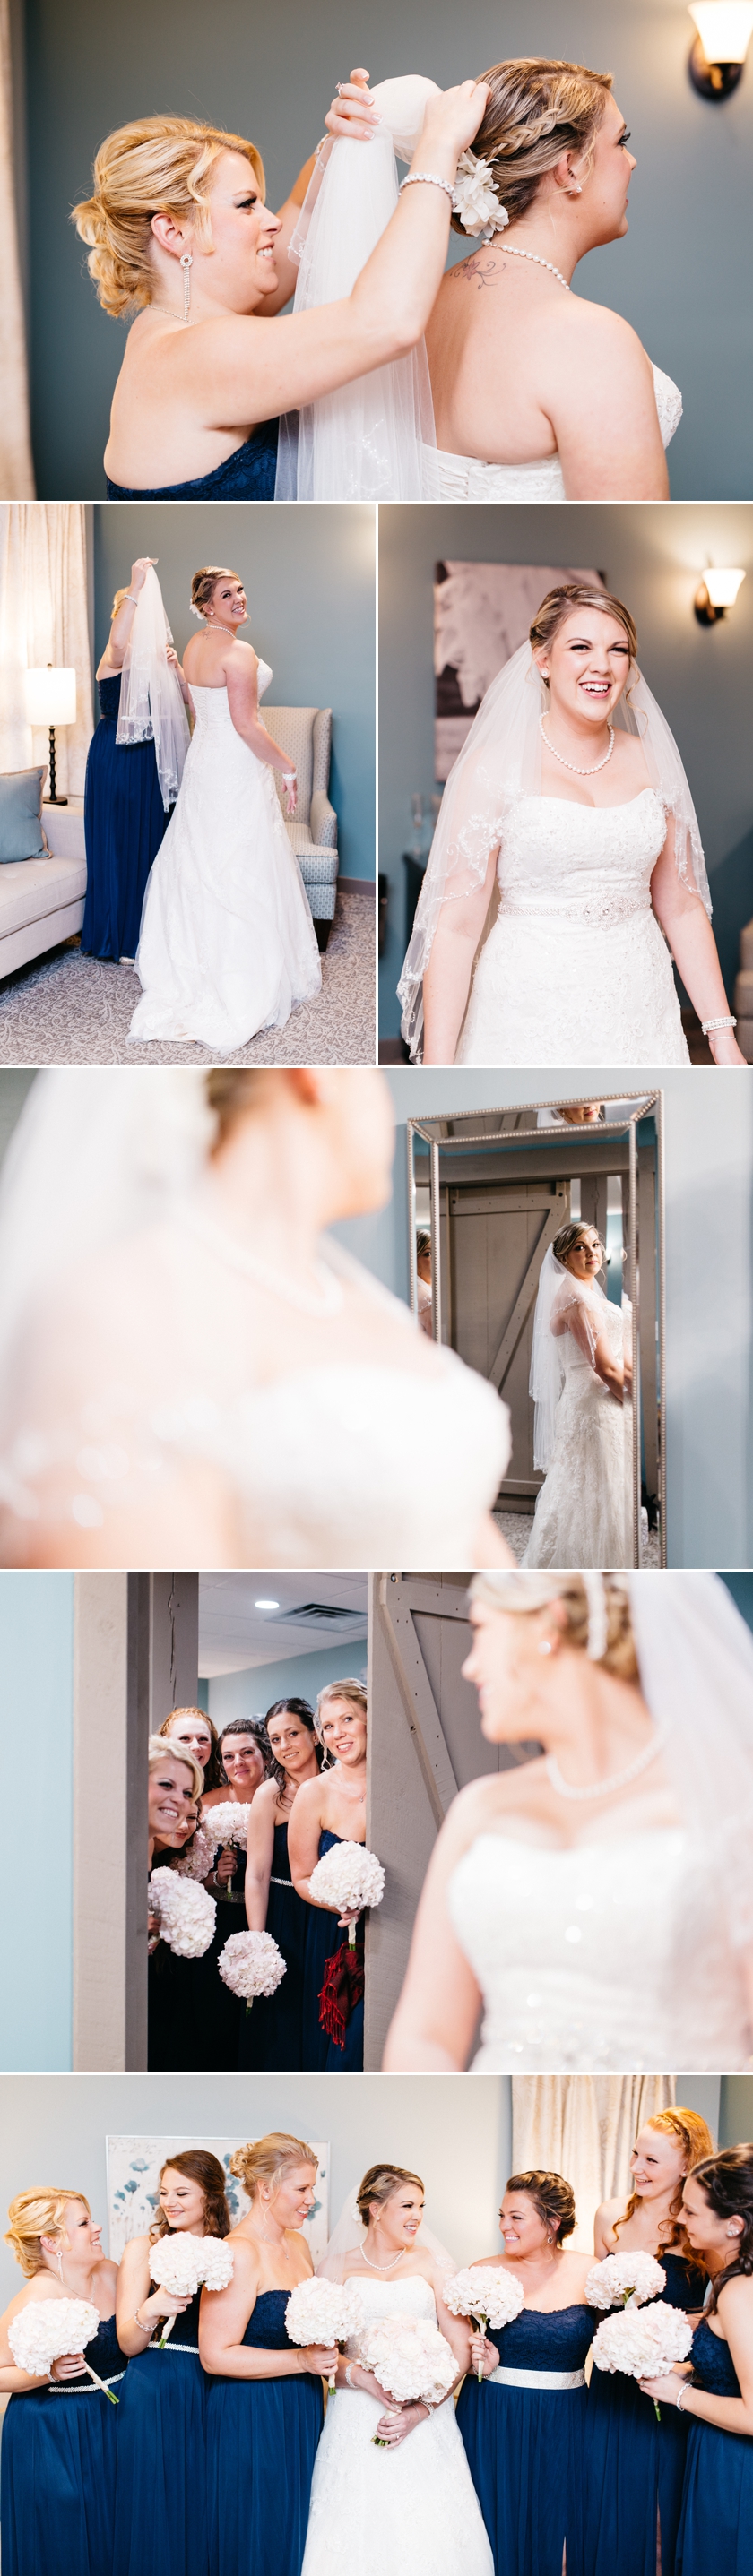 photo collage of getting ready at nichole and george's classic wedding at the wight barn in sturbridge massachusetts